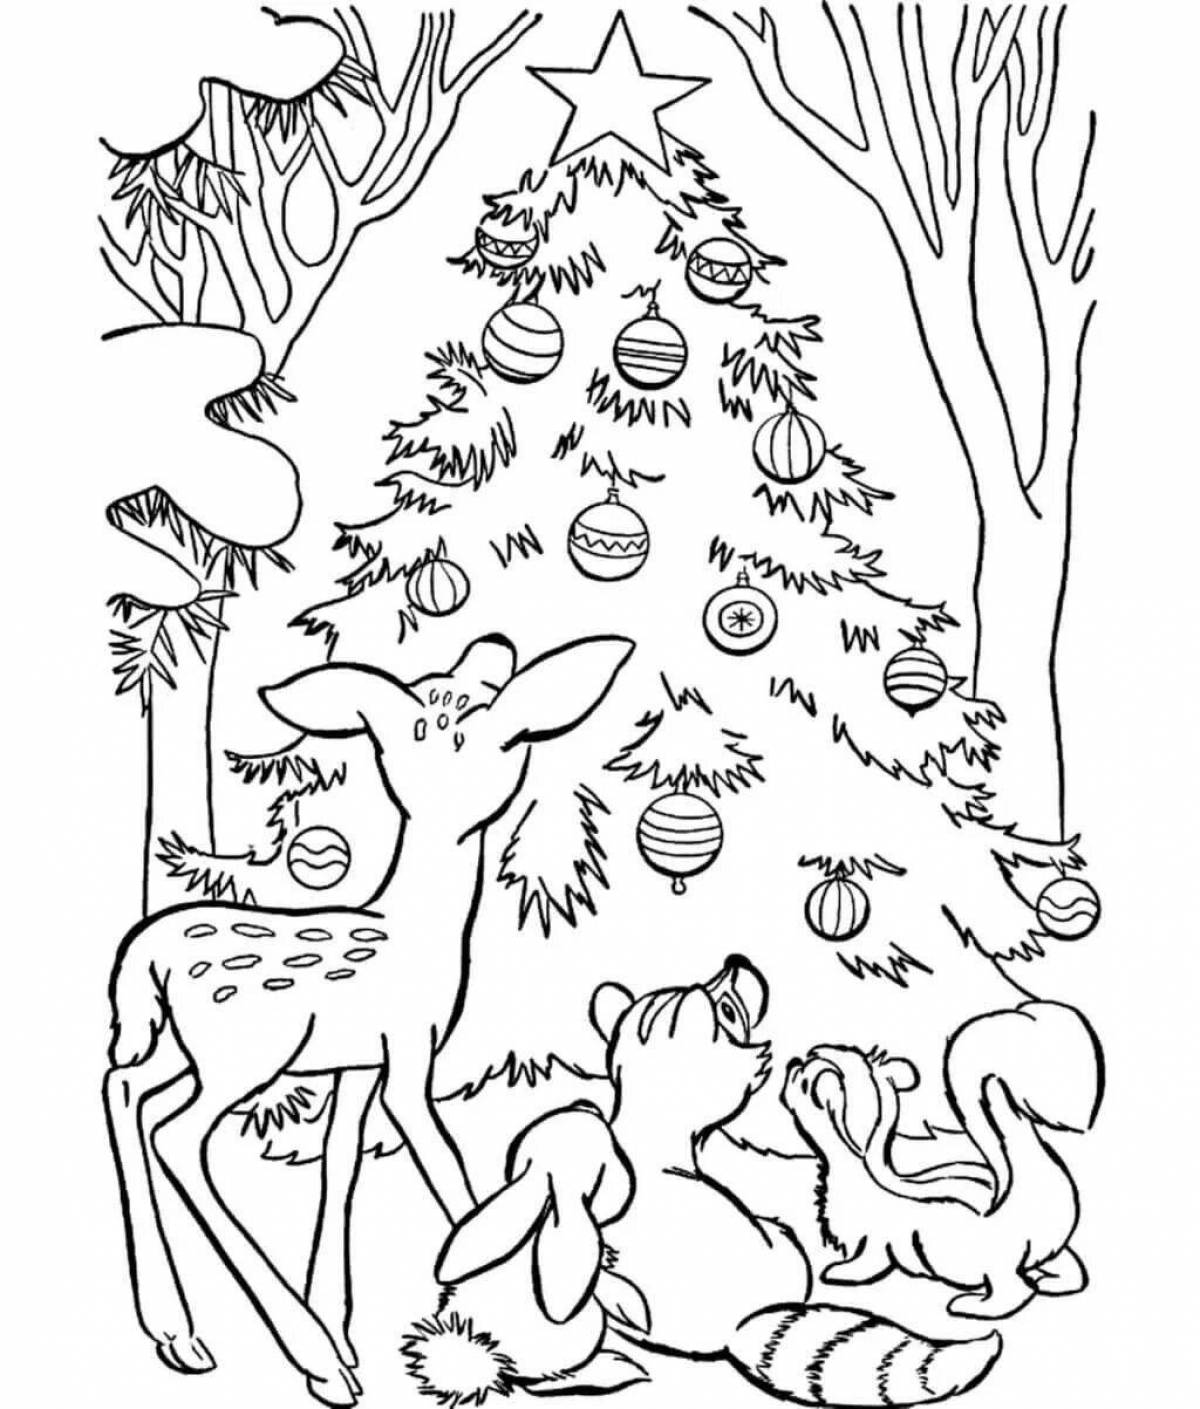 Joyful forest raised a Christmas tree coloring book